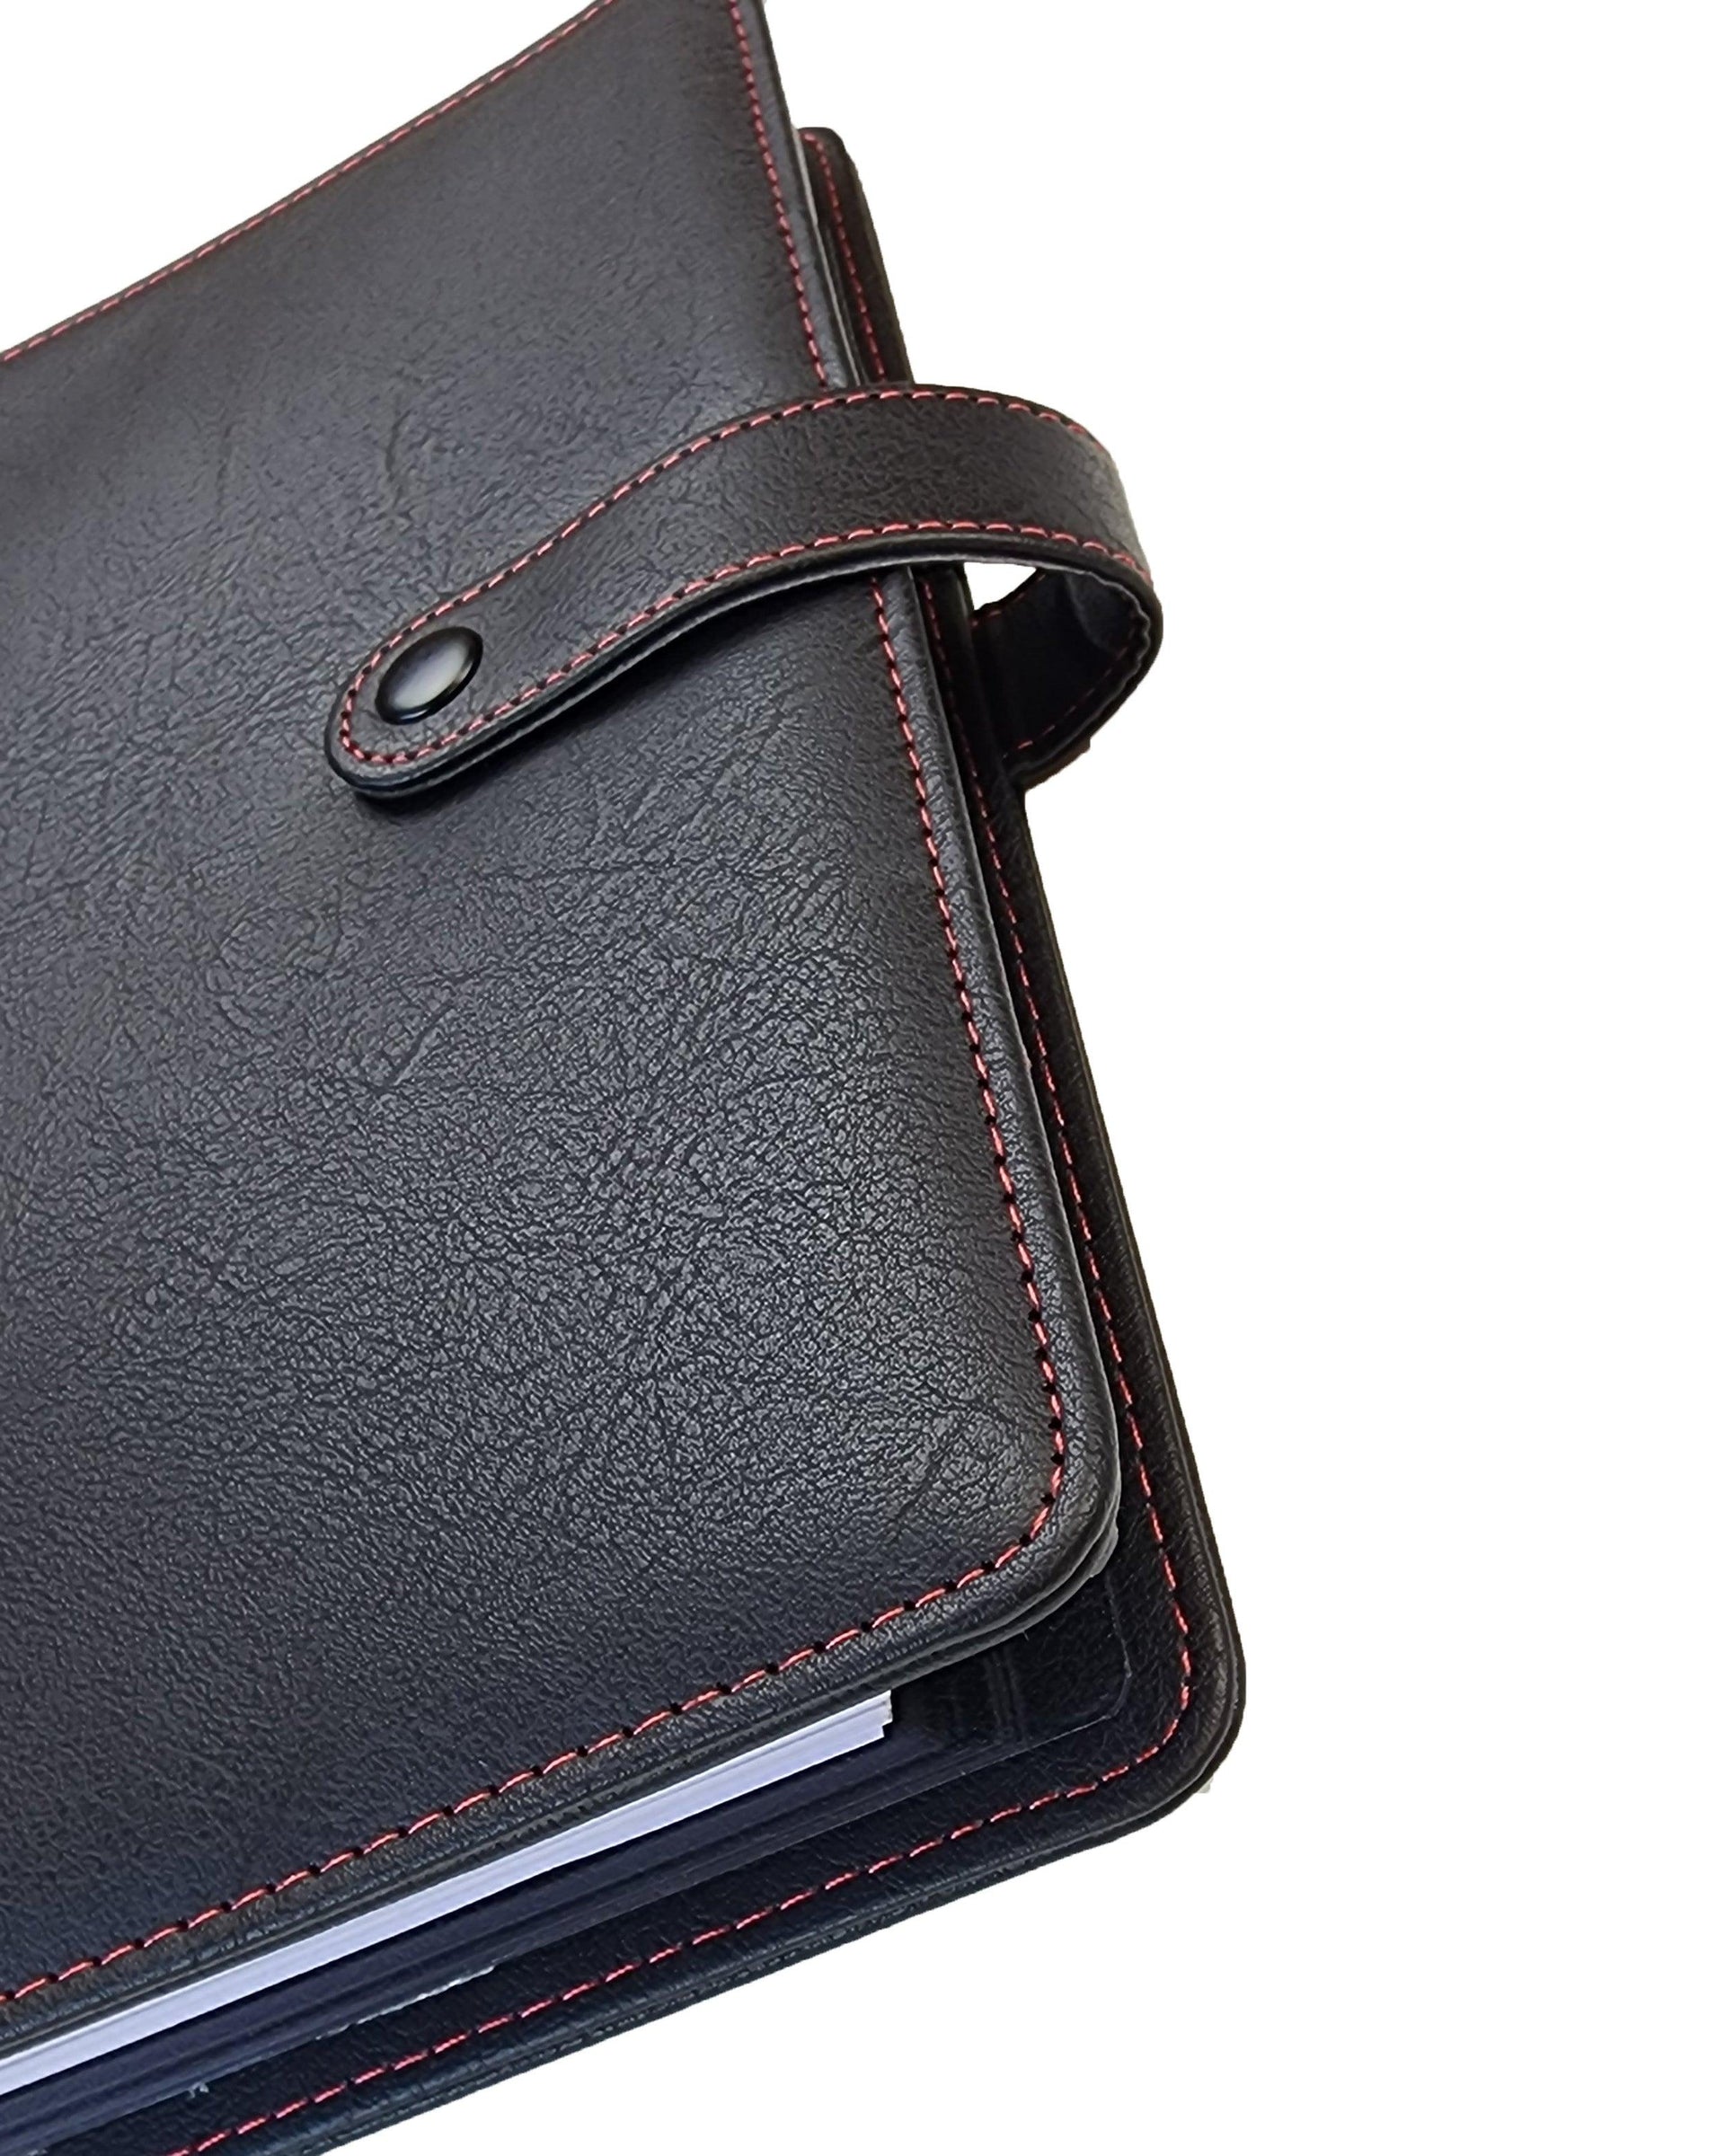 Vegan leather in black with red stitching discbound planner cover and planner notebook portfolio for discbound planners by Janes Agenda.